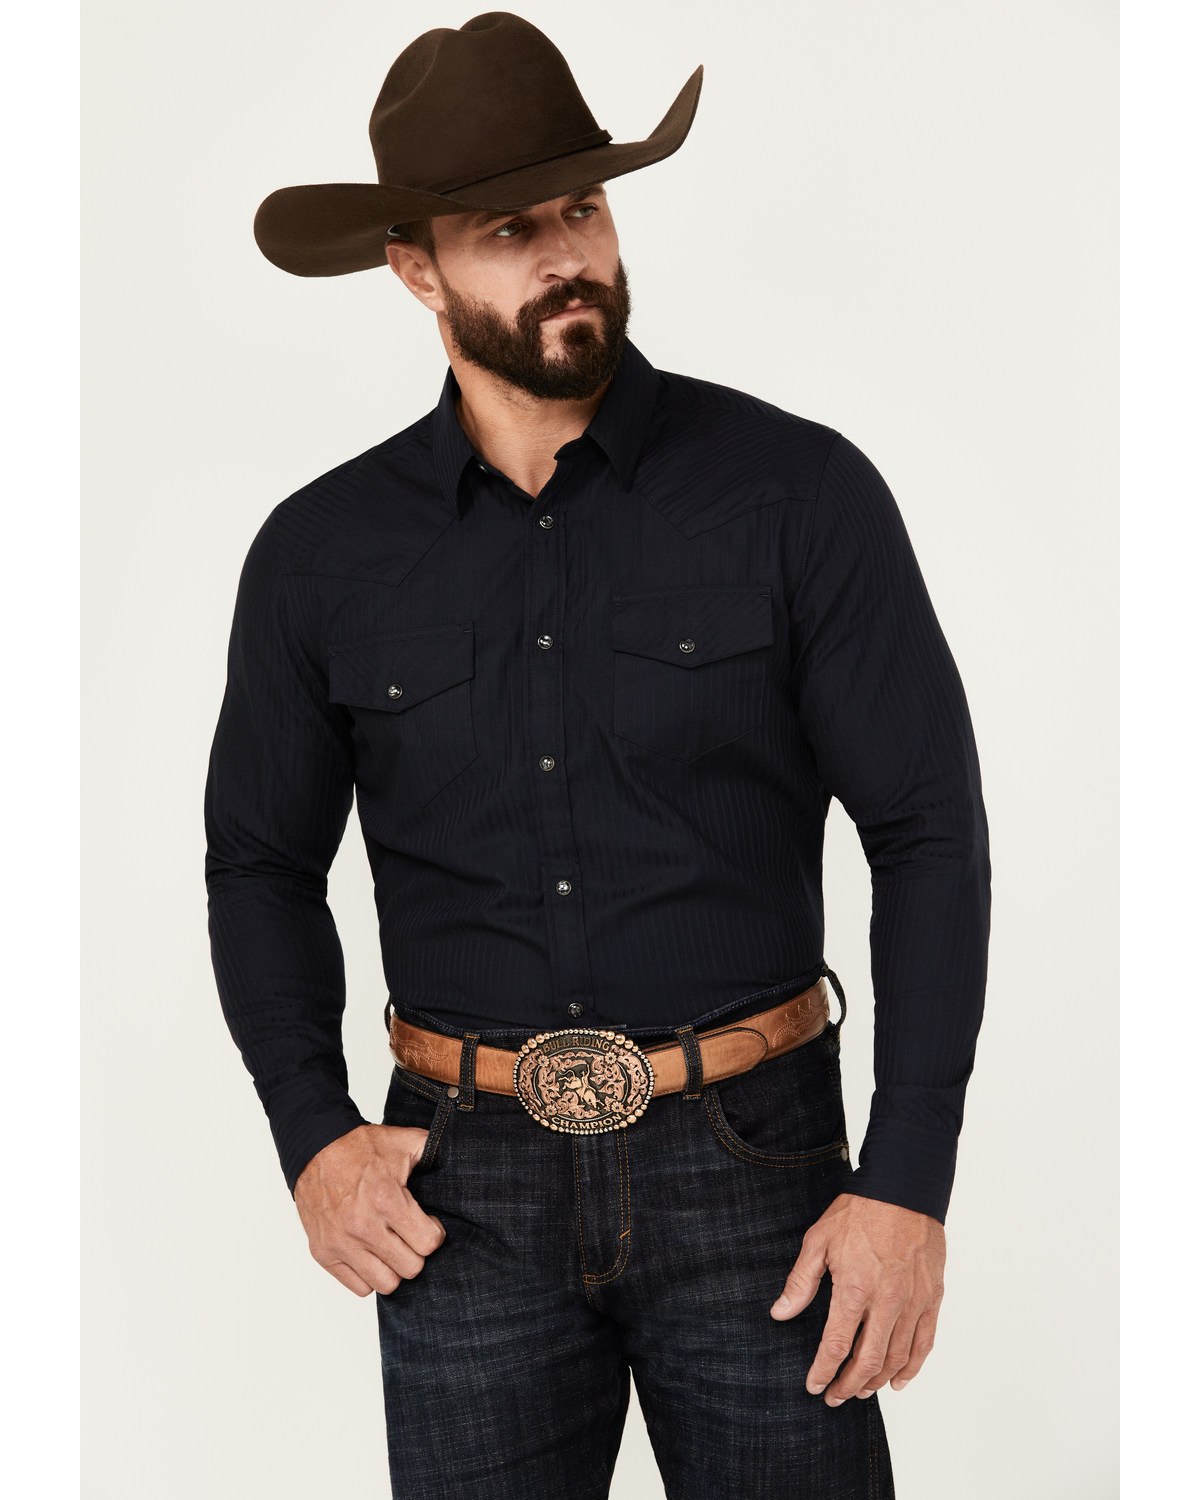 Gibson Trading Co Men's Southside Long Sleeve Snap Western Shirt